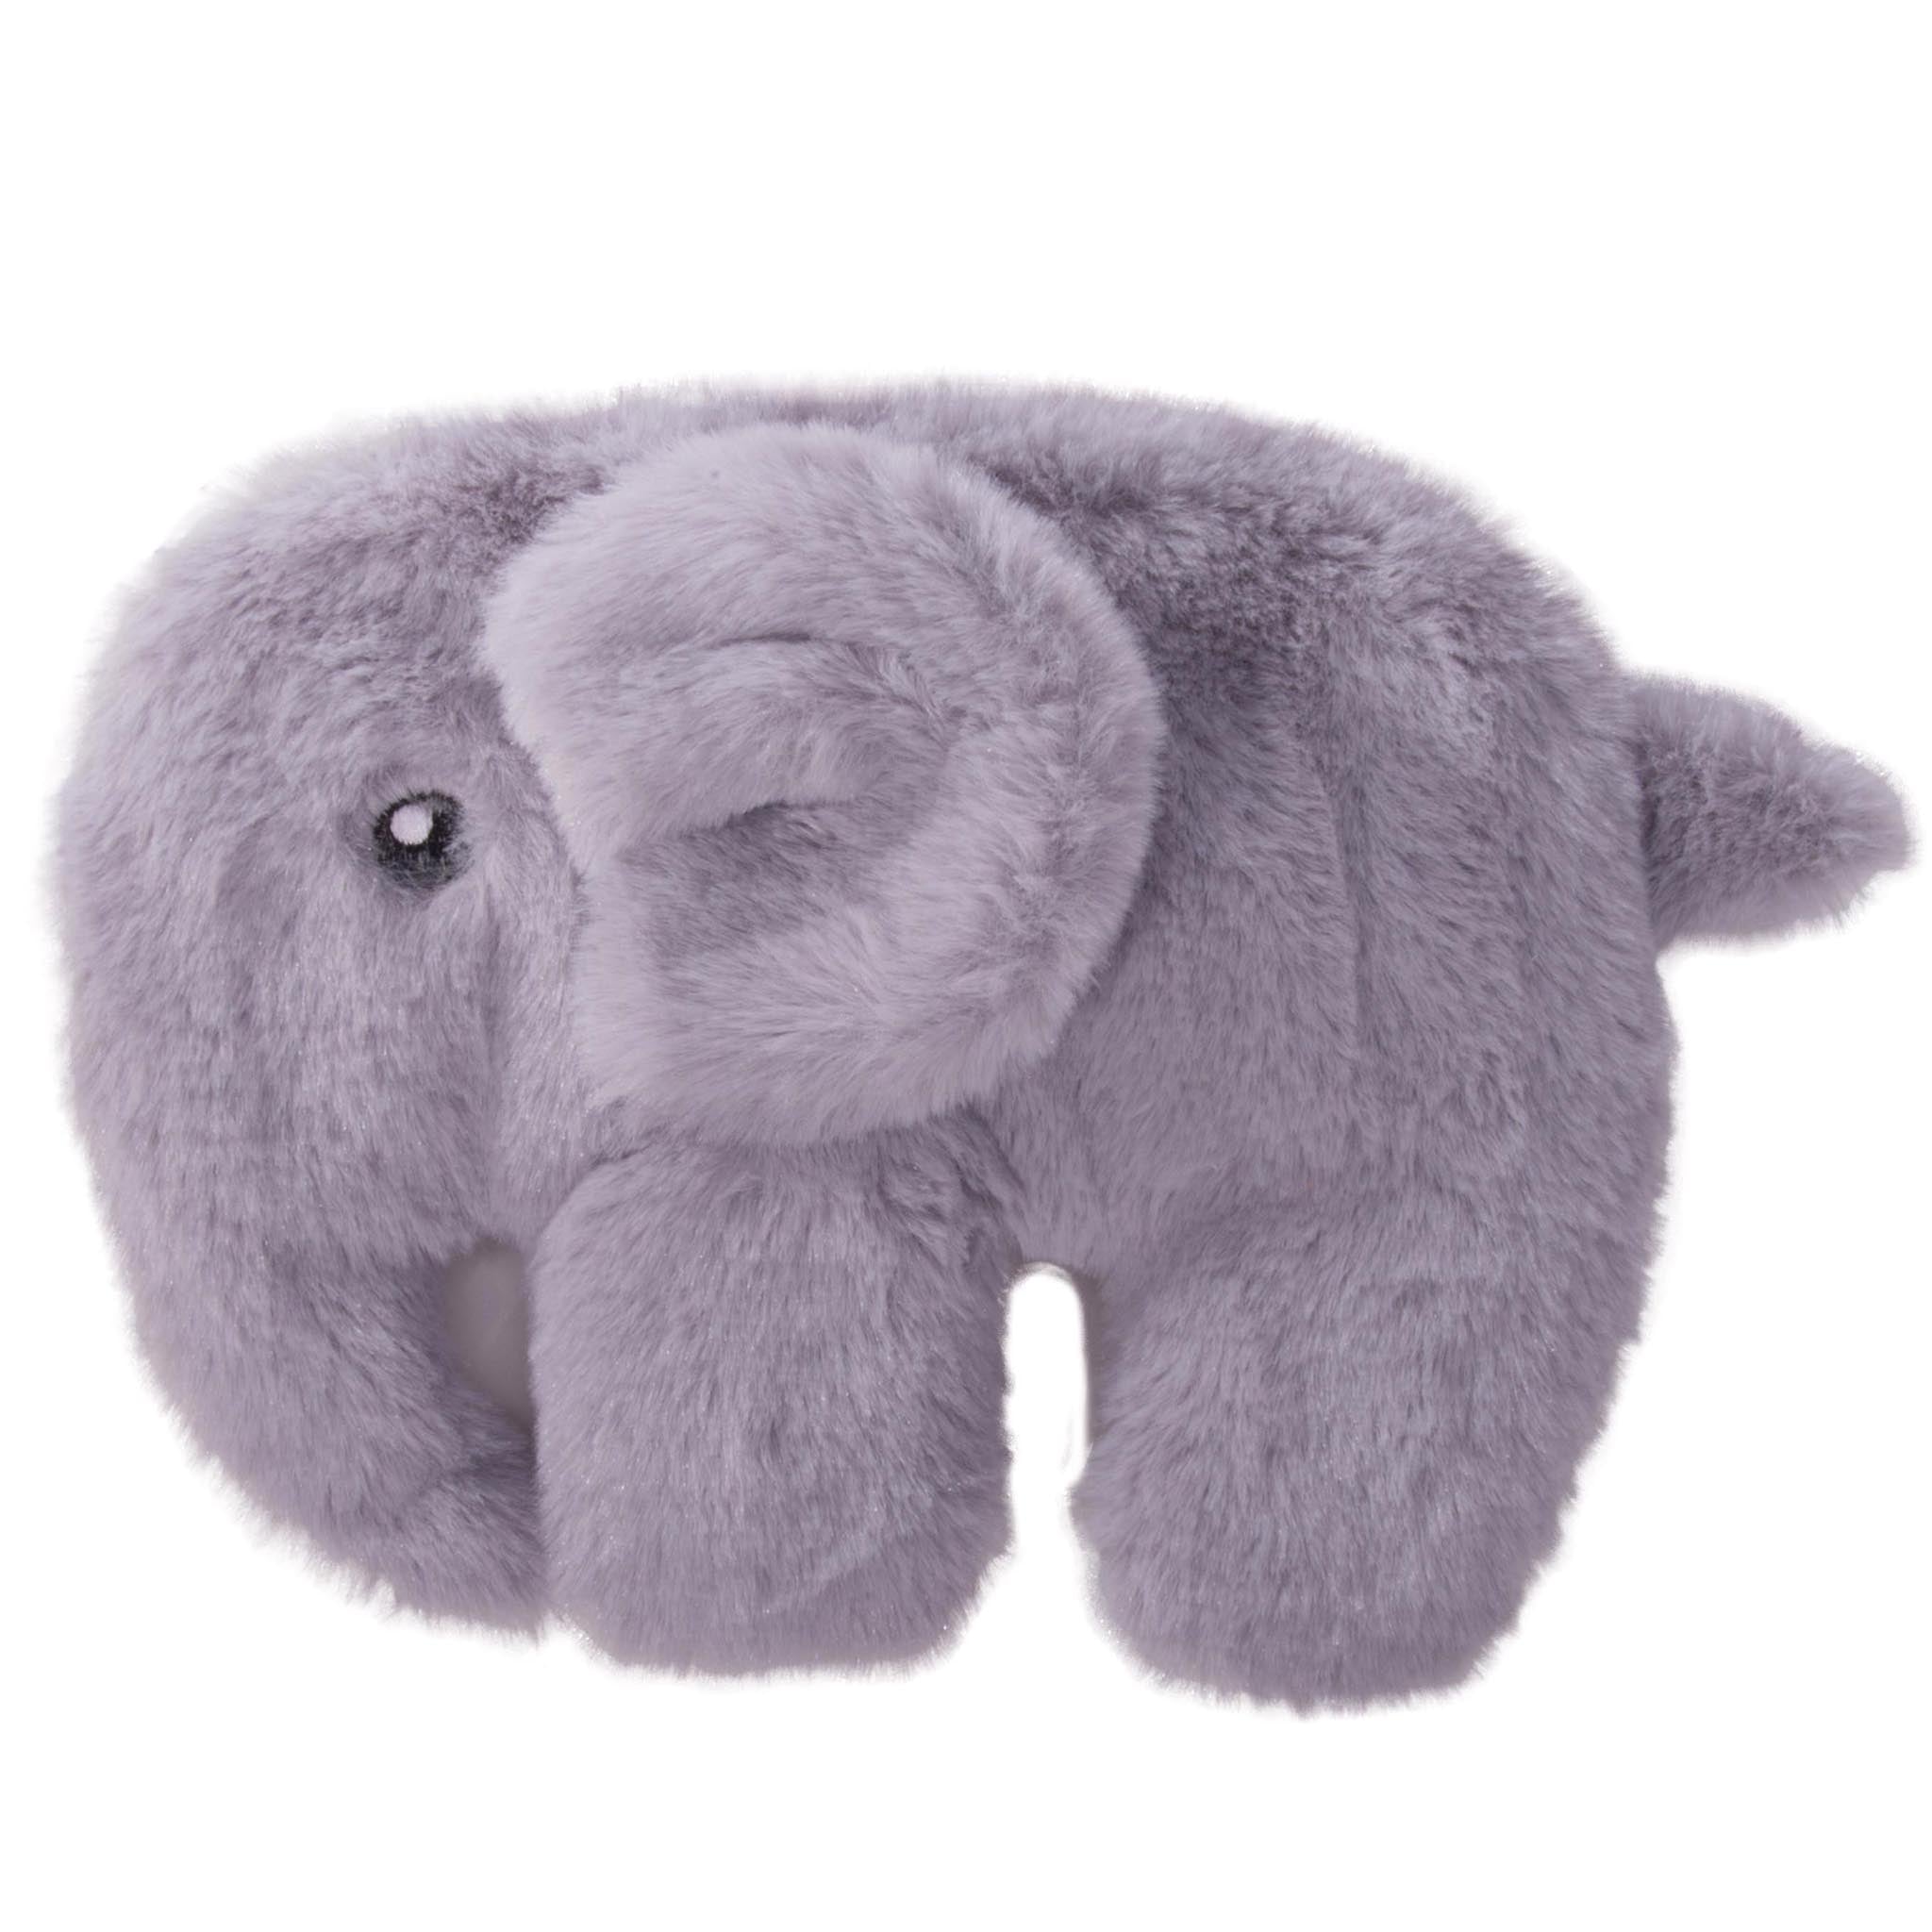 Animal Heat Pack Toys Not specified Elephant 